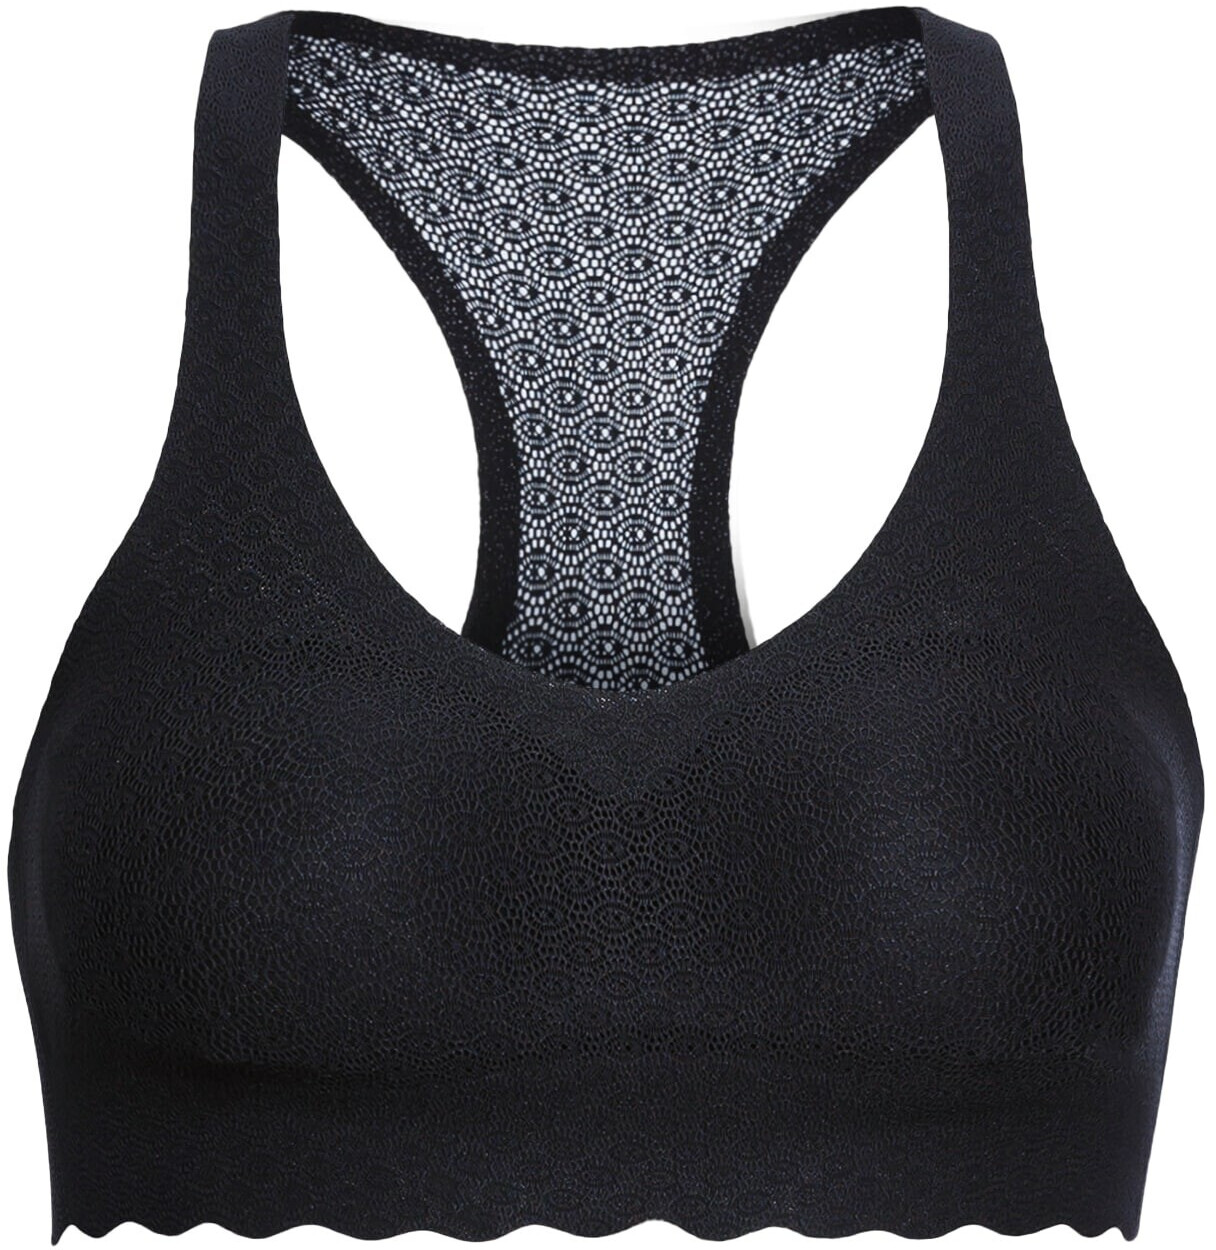 Buy Sloggi Zero Feel Lace Top (10201958) from £12.72 (Today